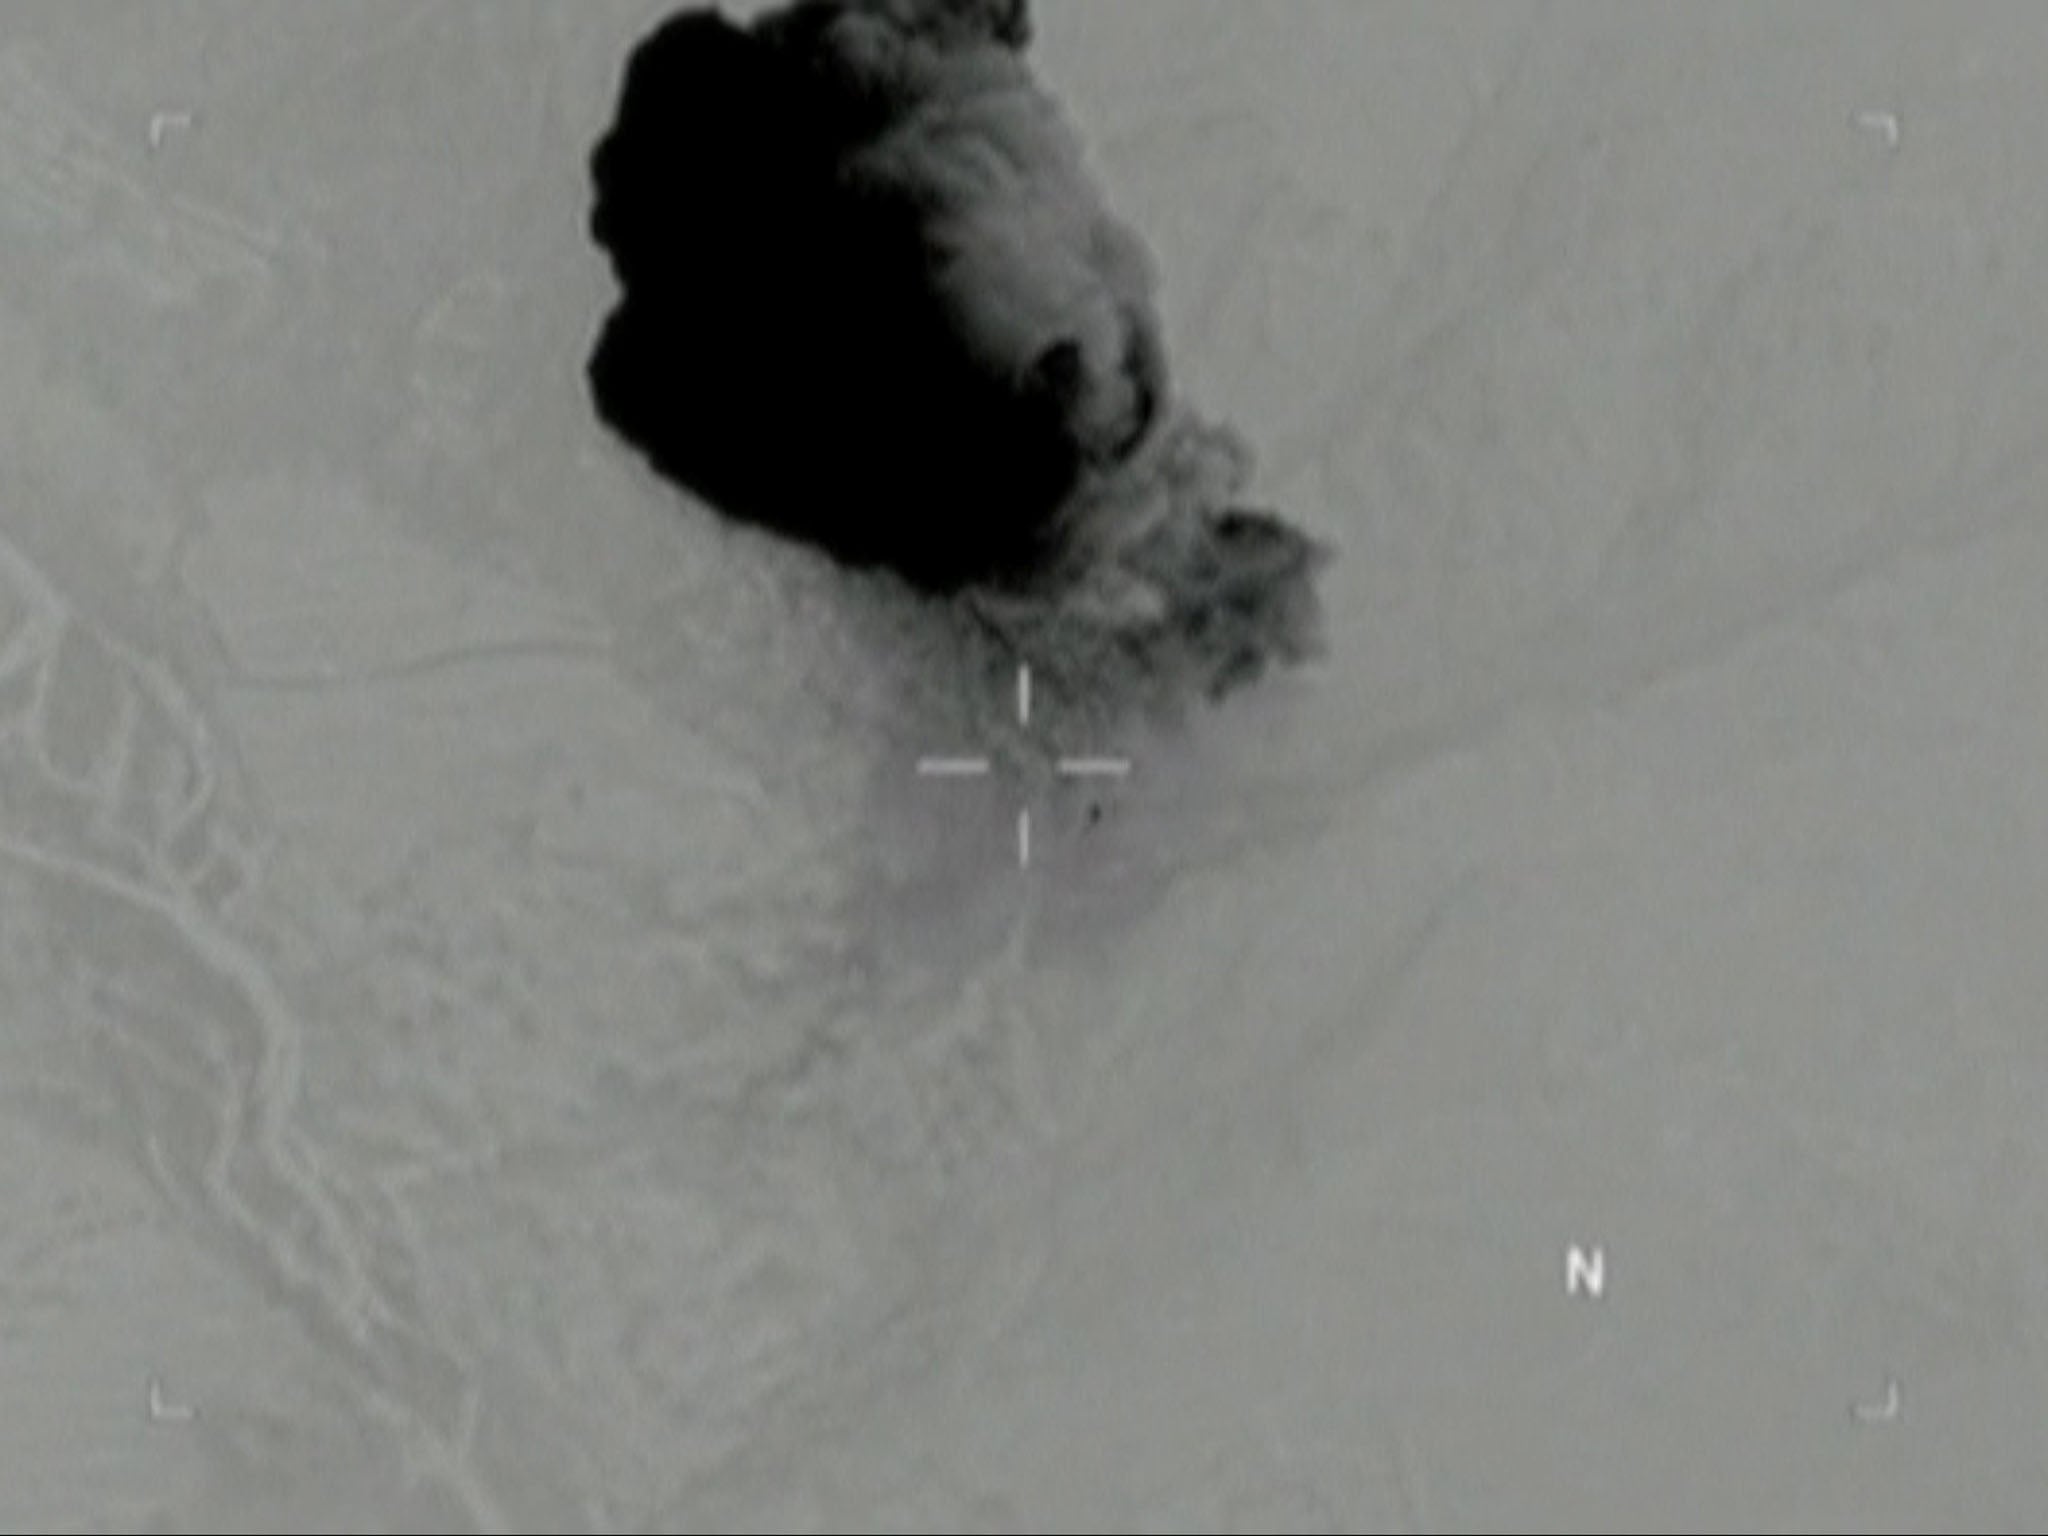 Still image from a video released by the US Department of Defence shows the moment the ‘mother of all bombs’ struck in Nangarhar (Reu